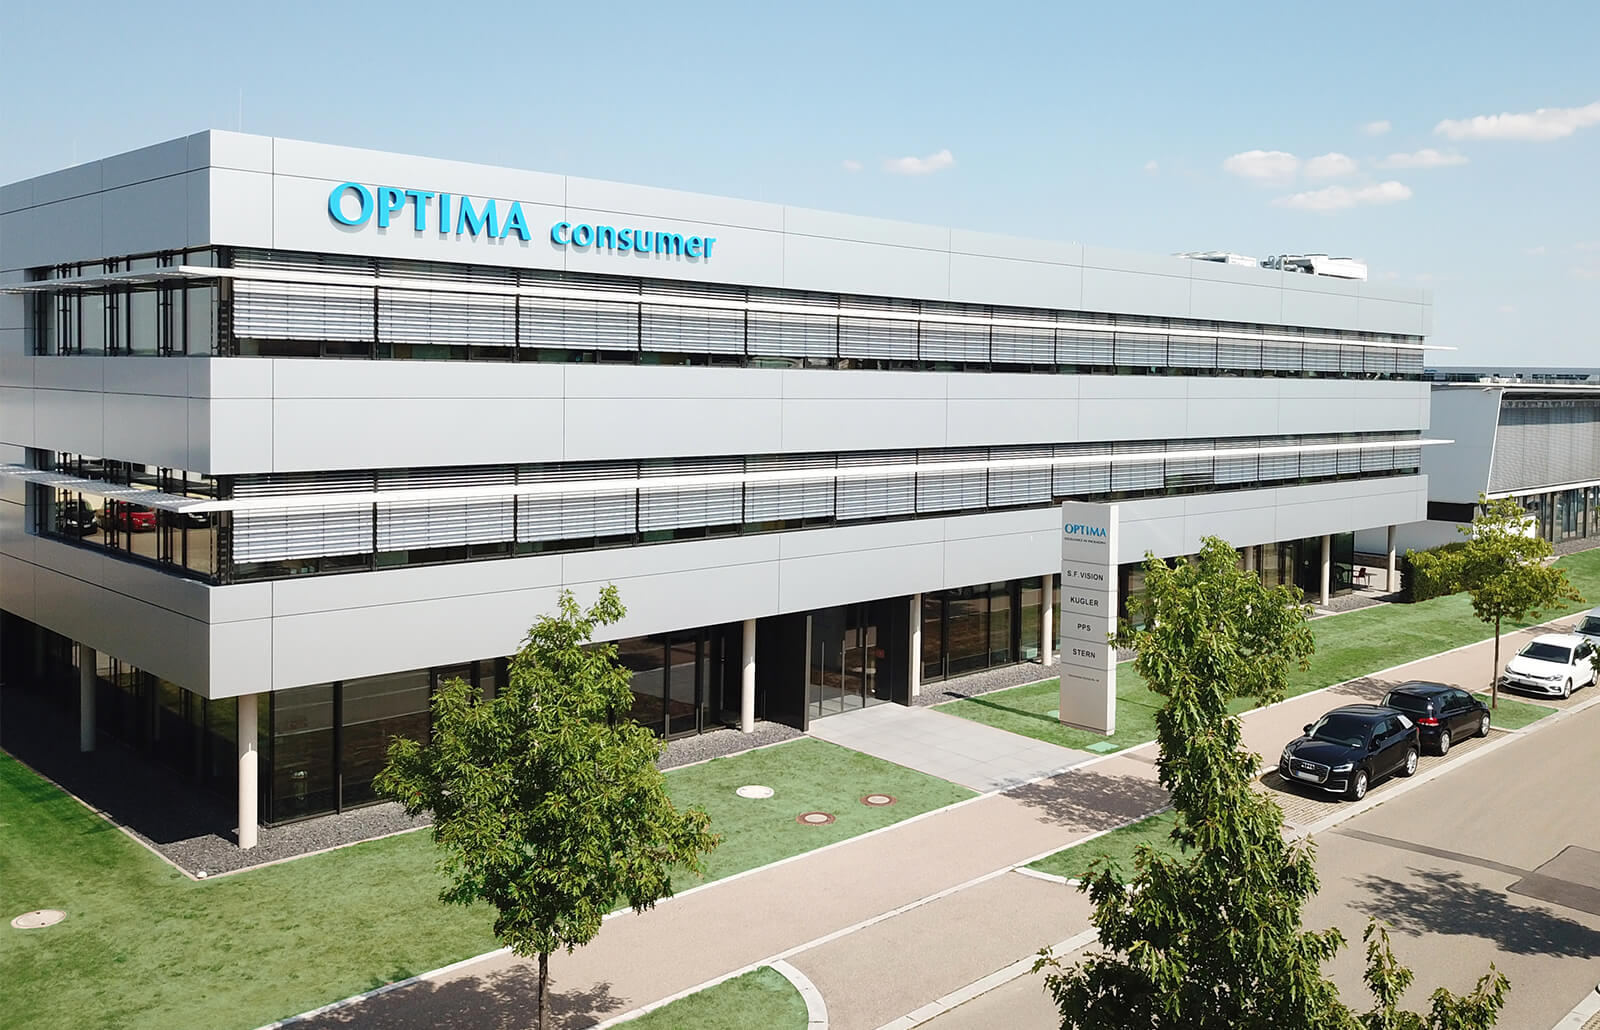 100 YEARS OF OPTIMA - Room for the future